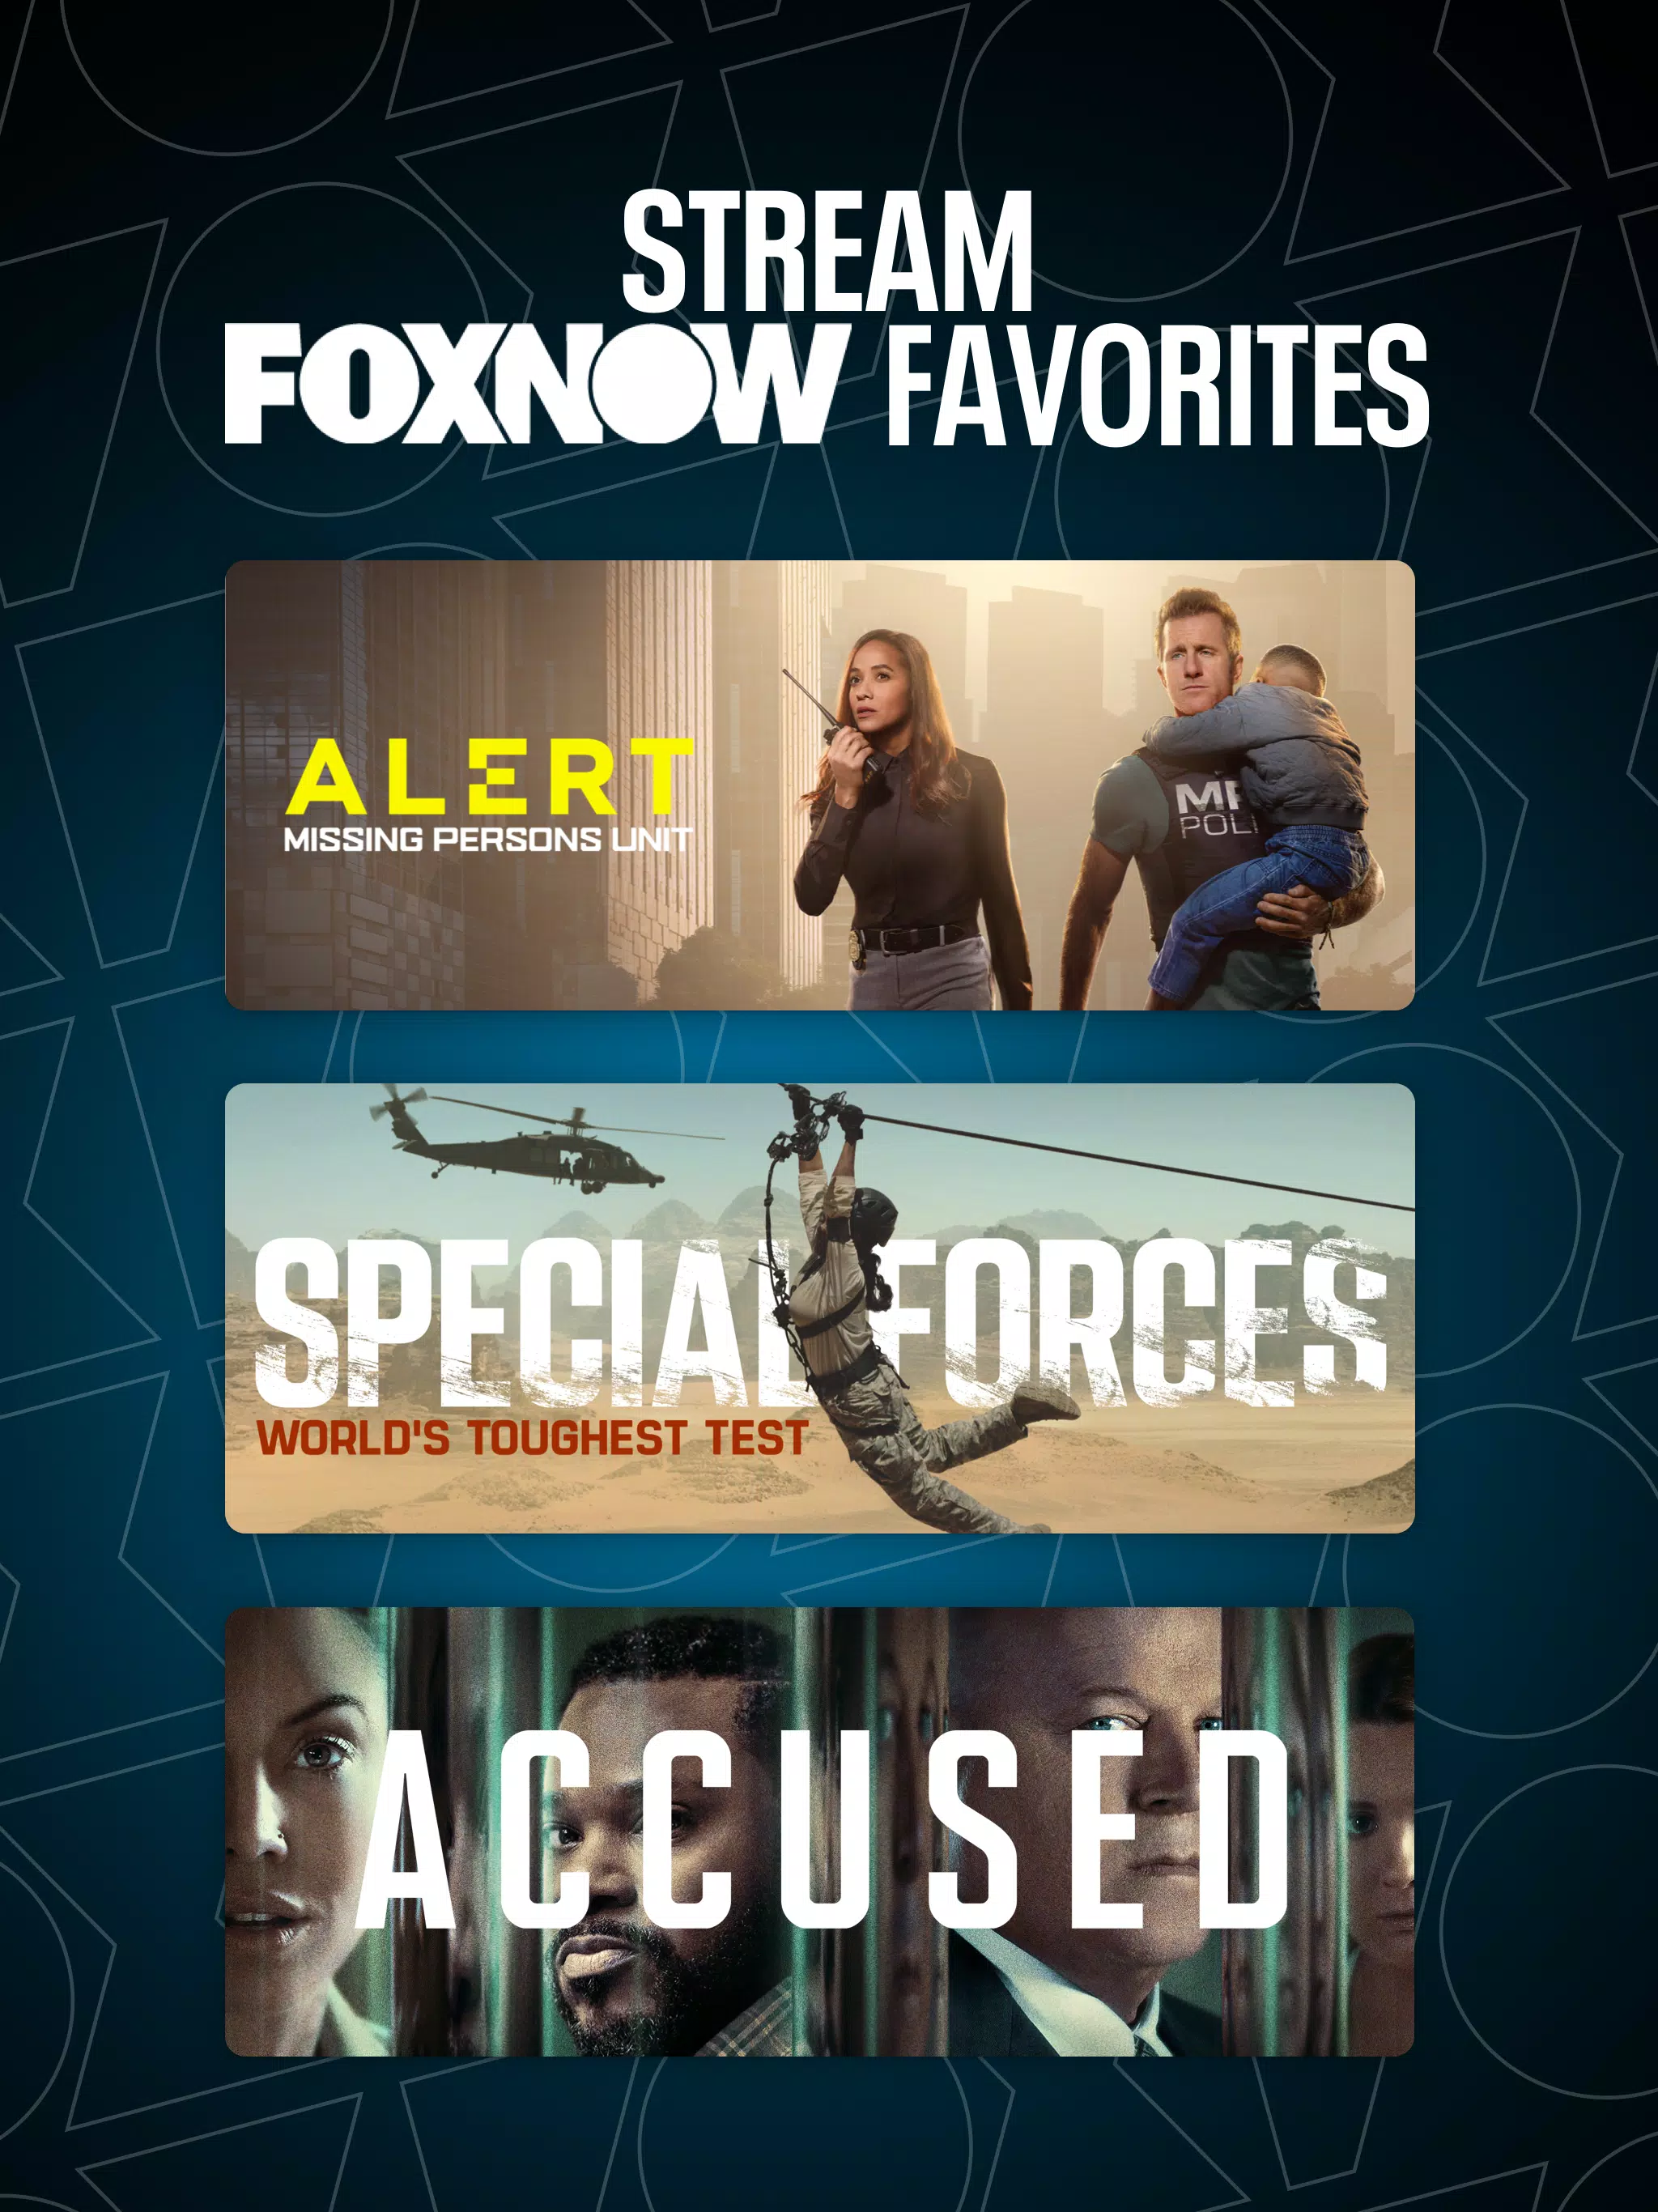 Fox4anime - Streaming TV Apk Download for Android- Latest version